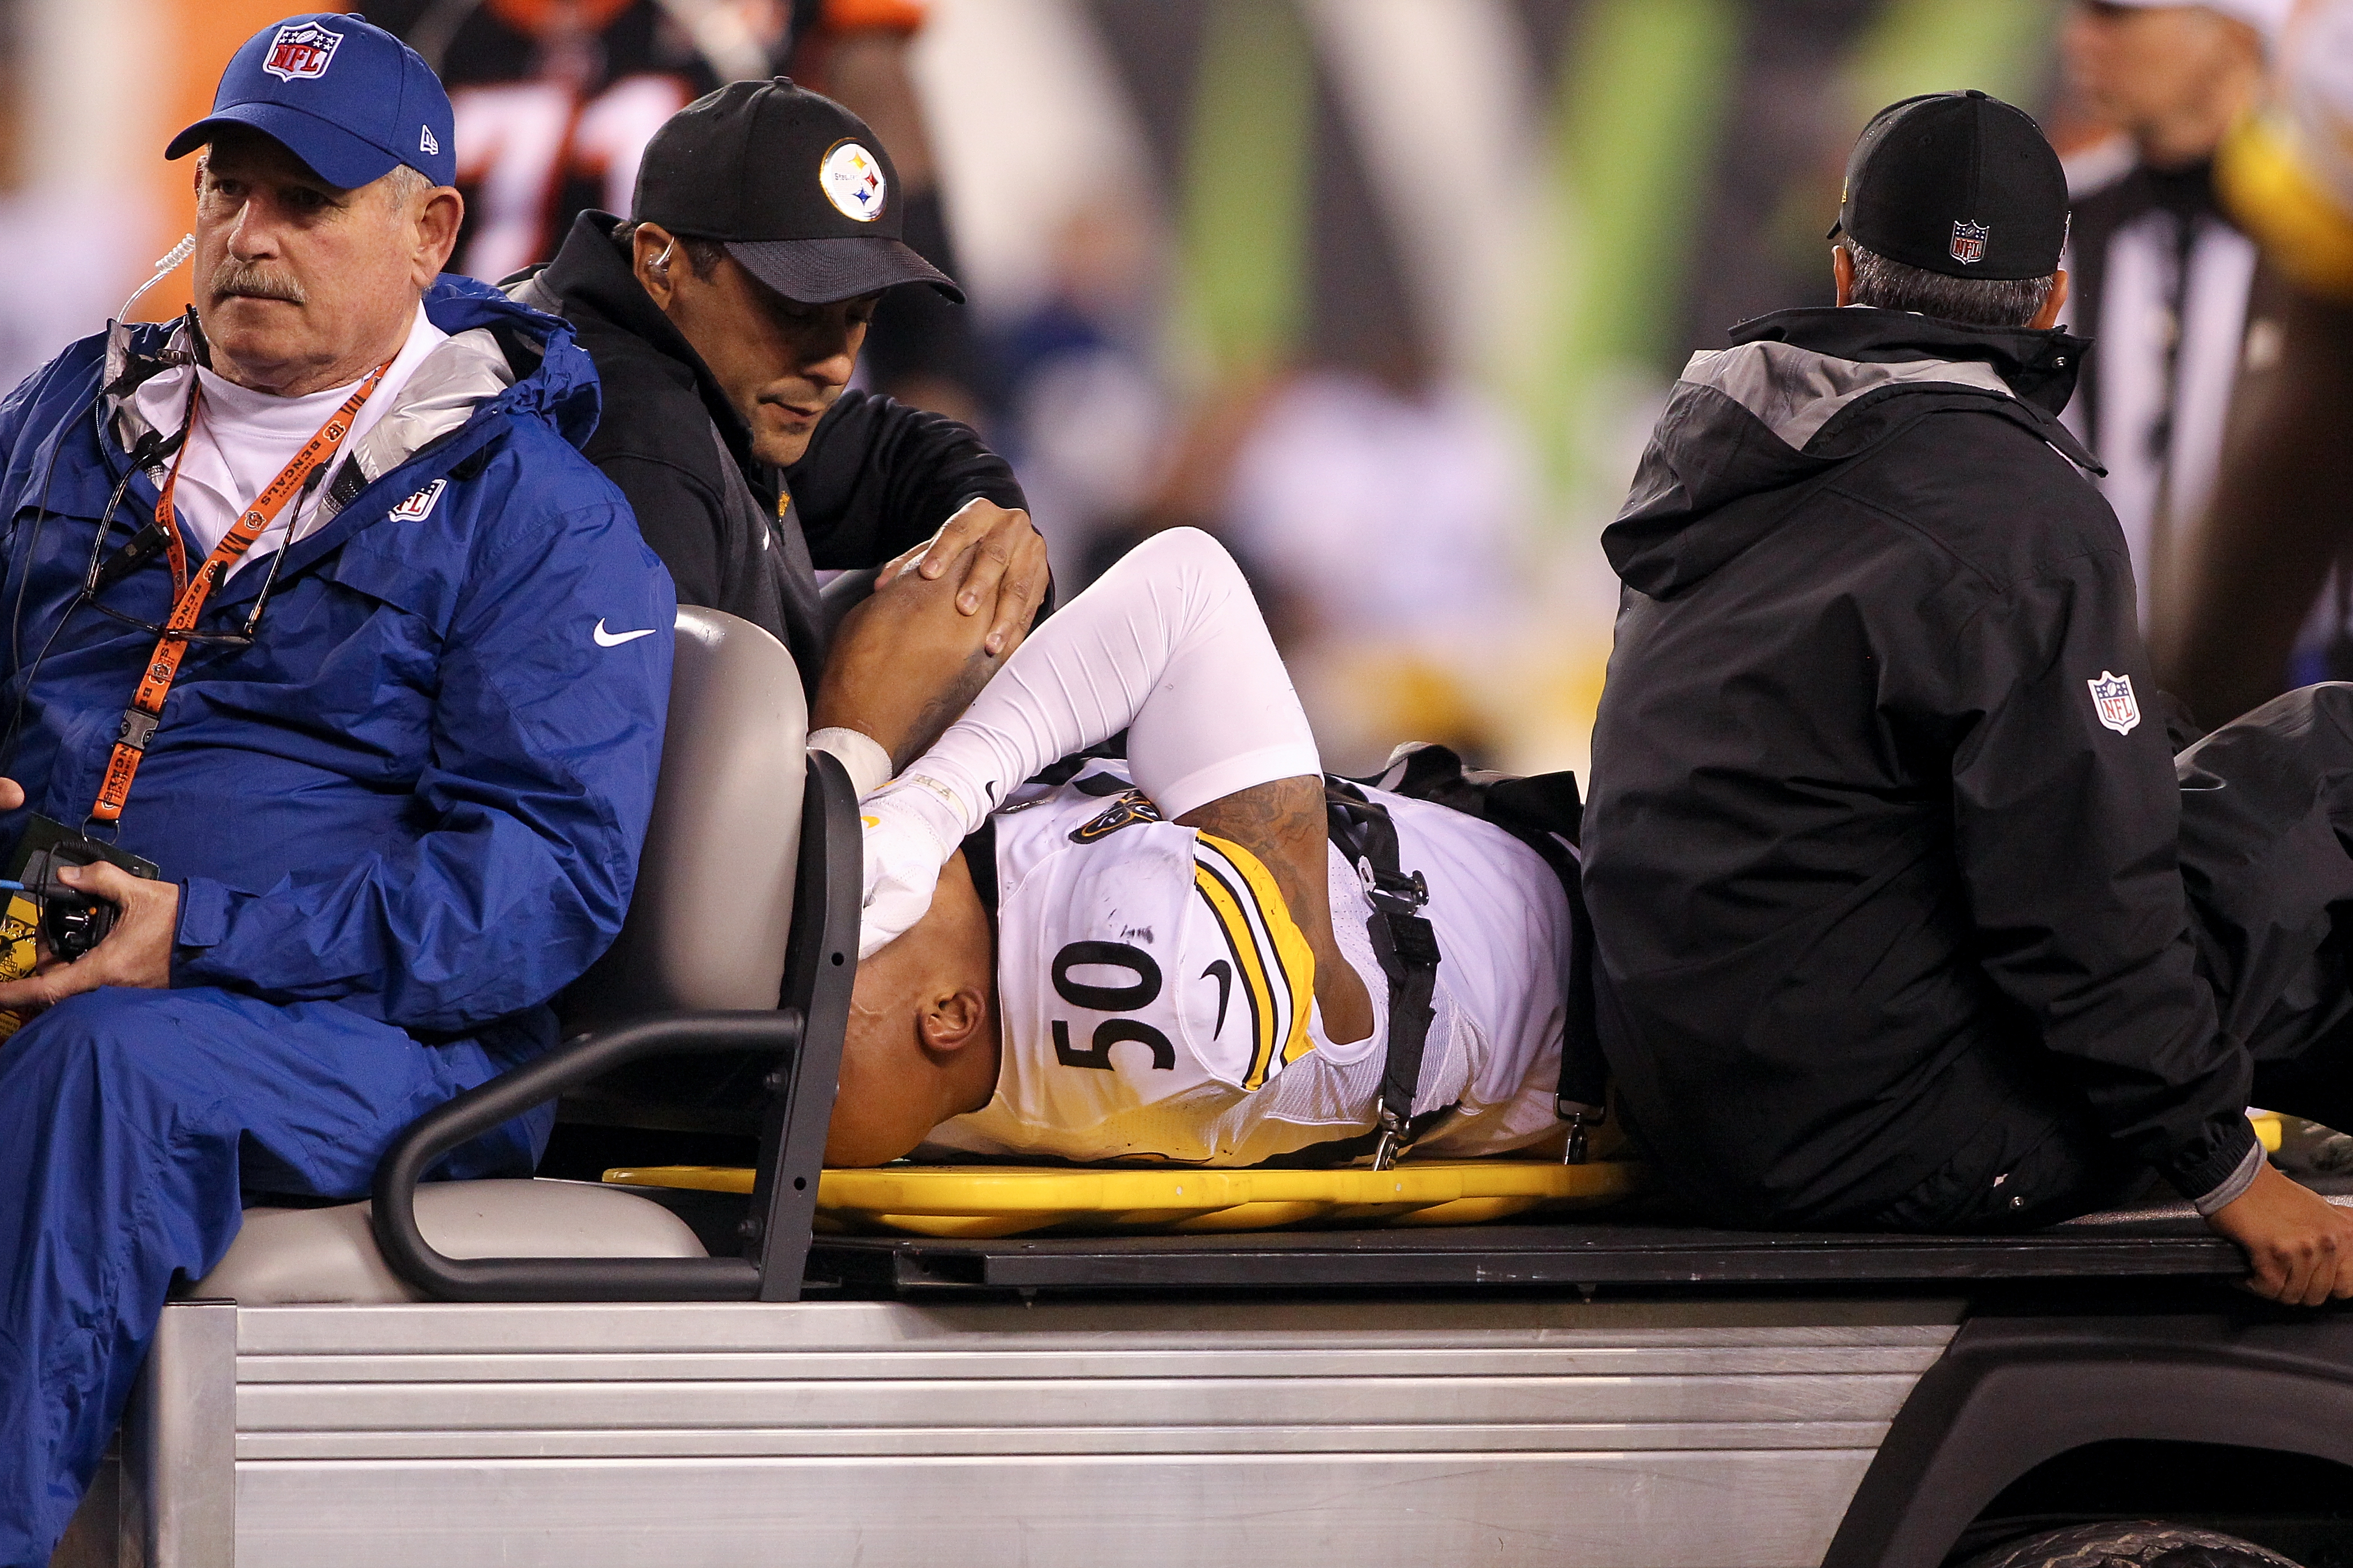 Ryan Shazier being carted off the field after an injury